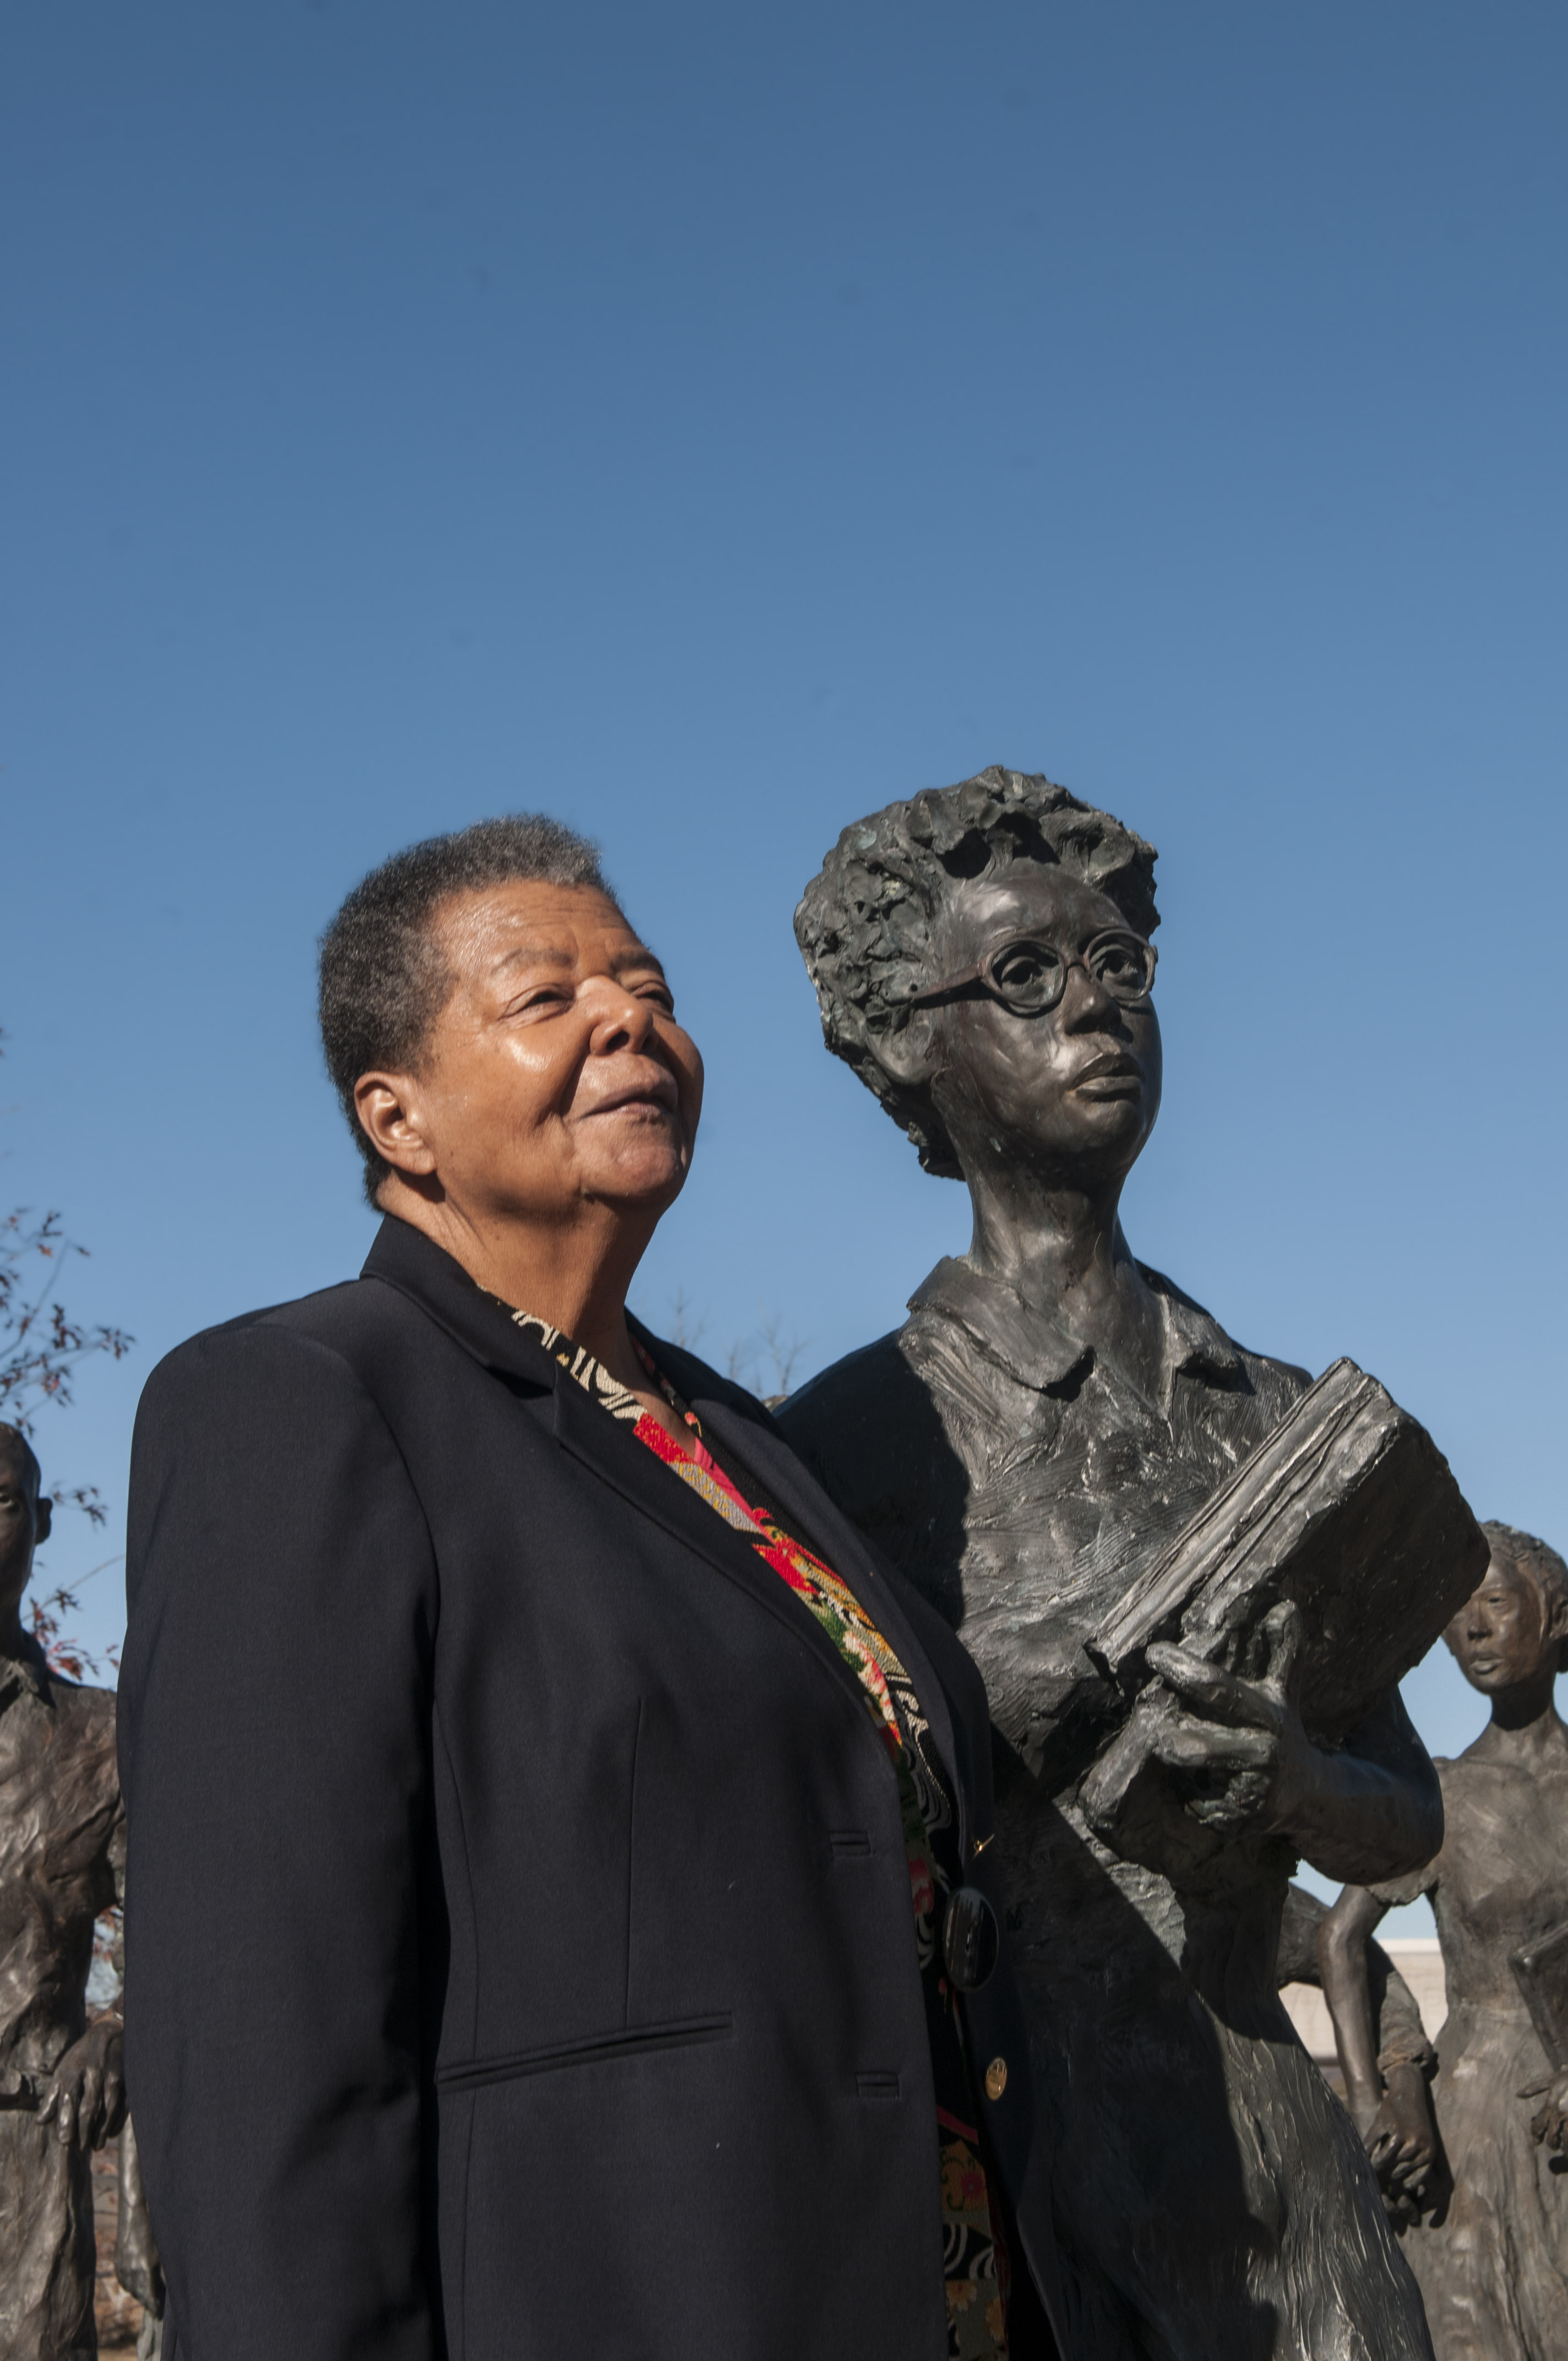 Elizabeth Eckford standing with the statue of herself